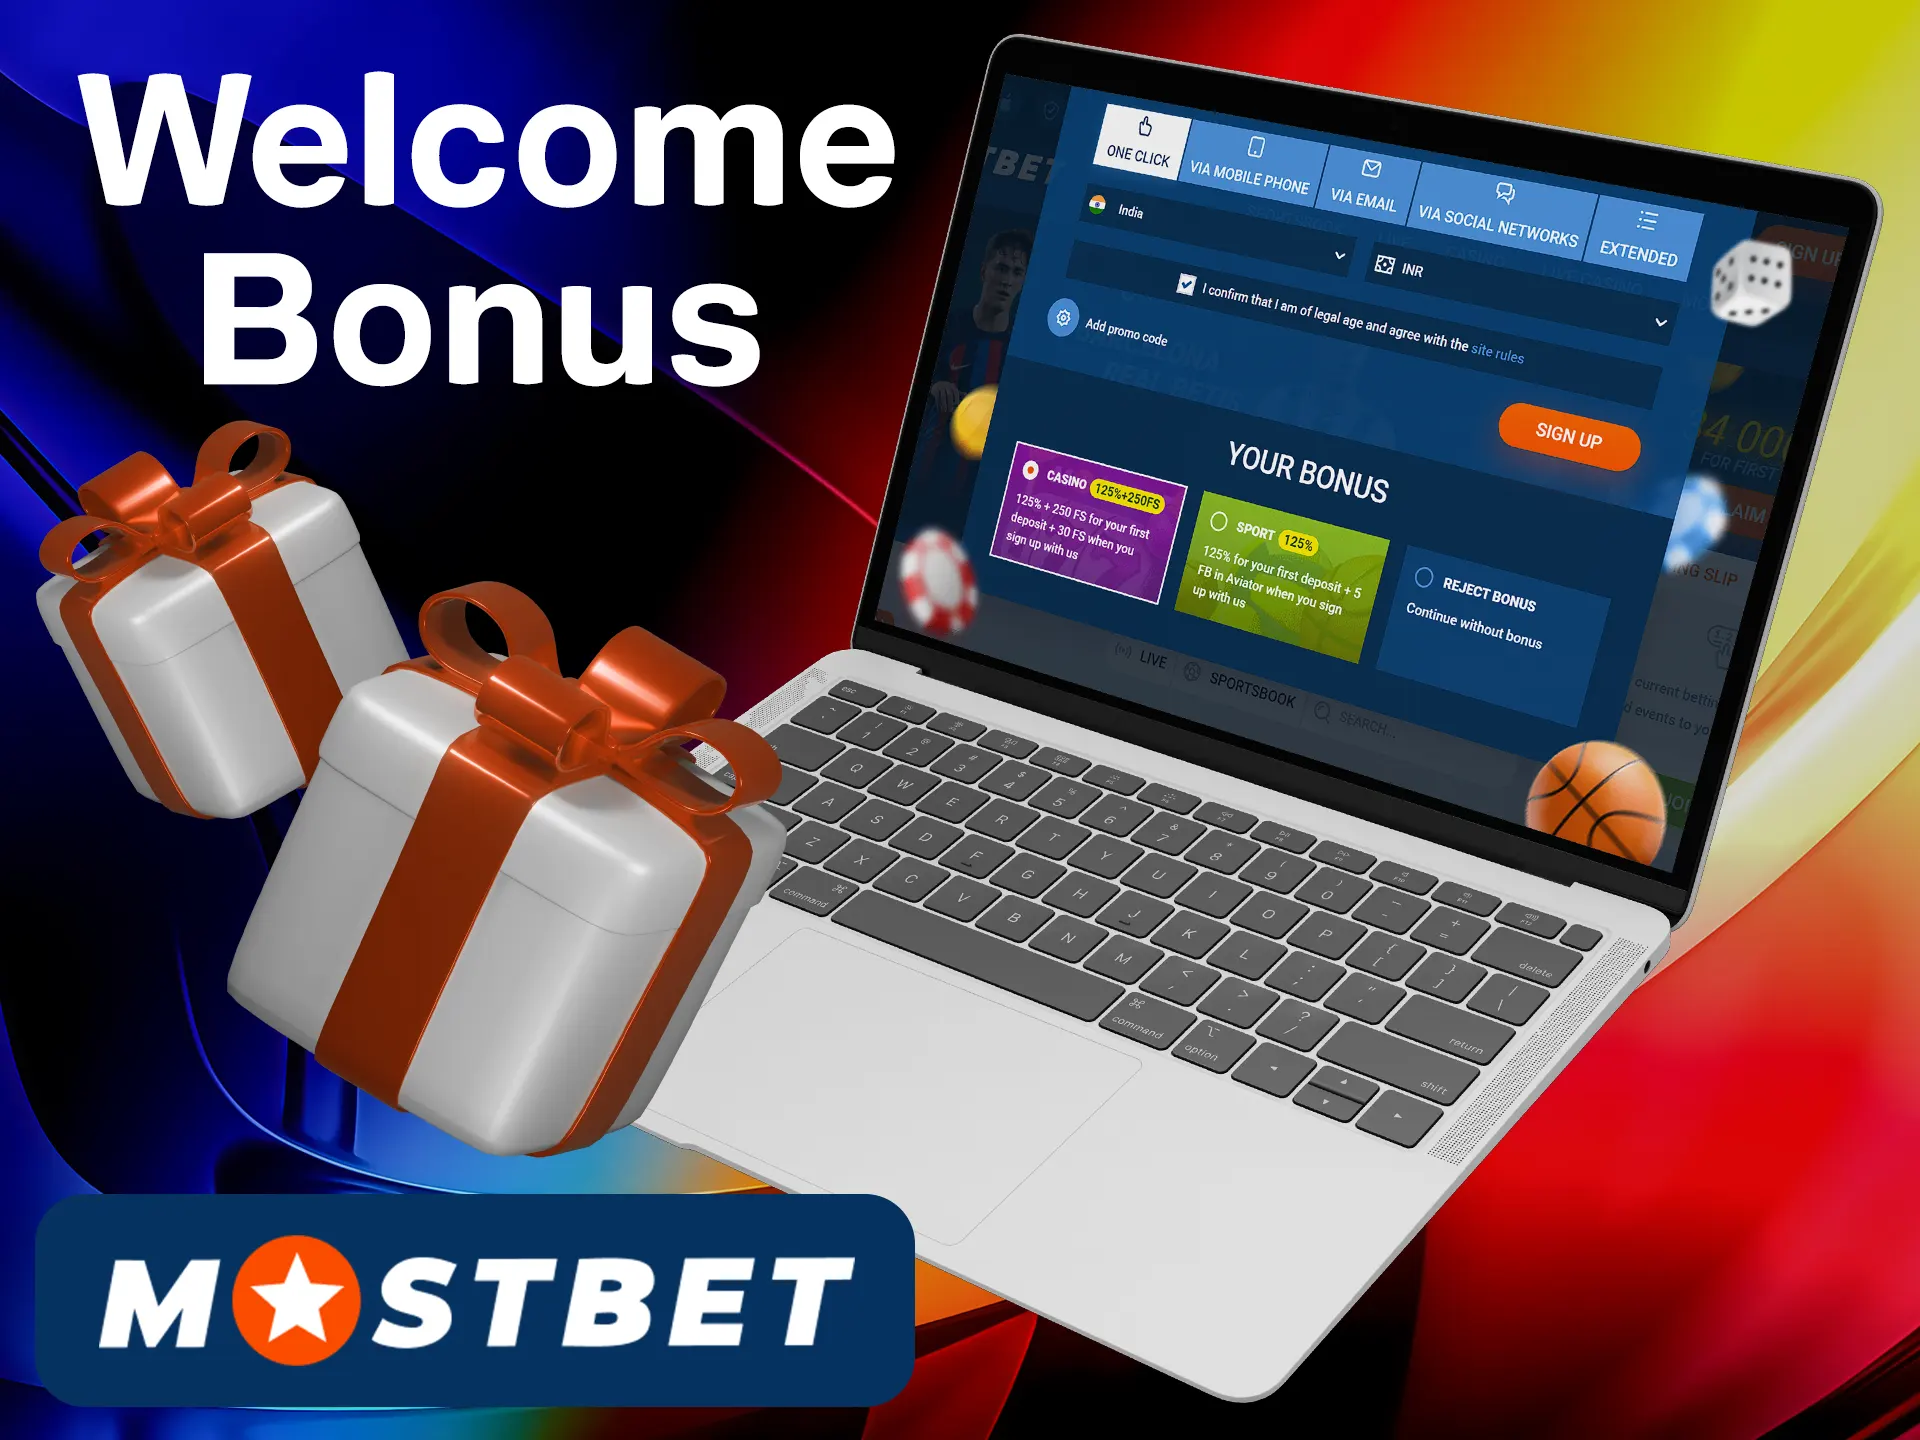 Claim your Mostbet welcome bonus after making a new account.